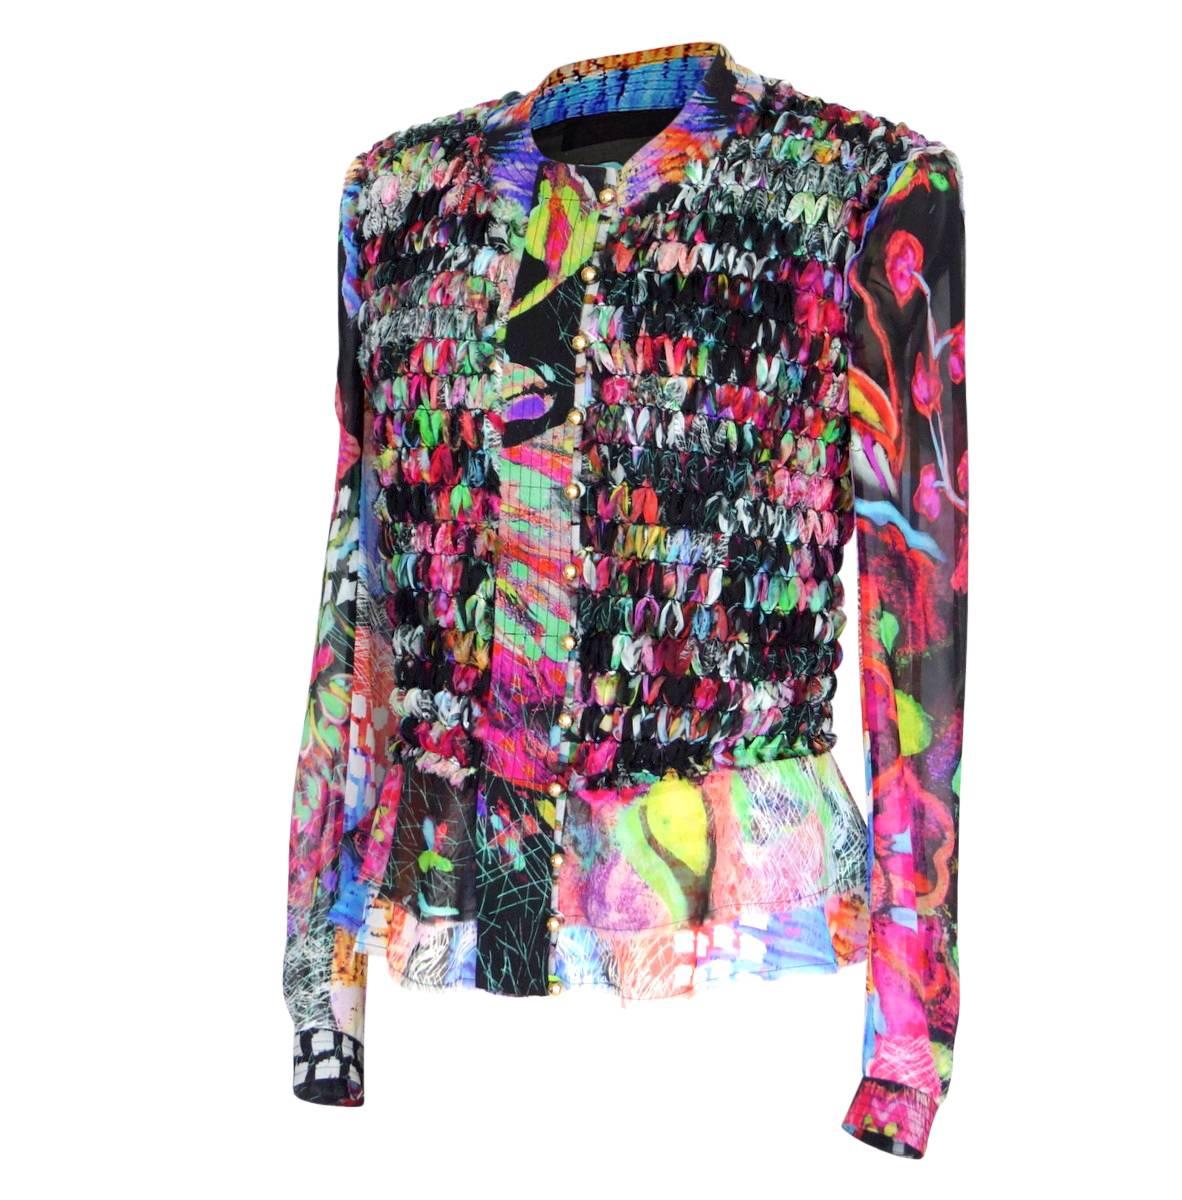 Mightychic offers a guaranteed authentic Roberto Cavalli lush floral and abstract print in black, blue, pinks, magenta, green and soft grey. 
12 small round gold buttons.  All logo embossed. Loop closures. 
1 logo embossed button at each cuff.